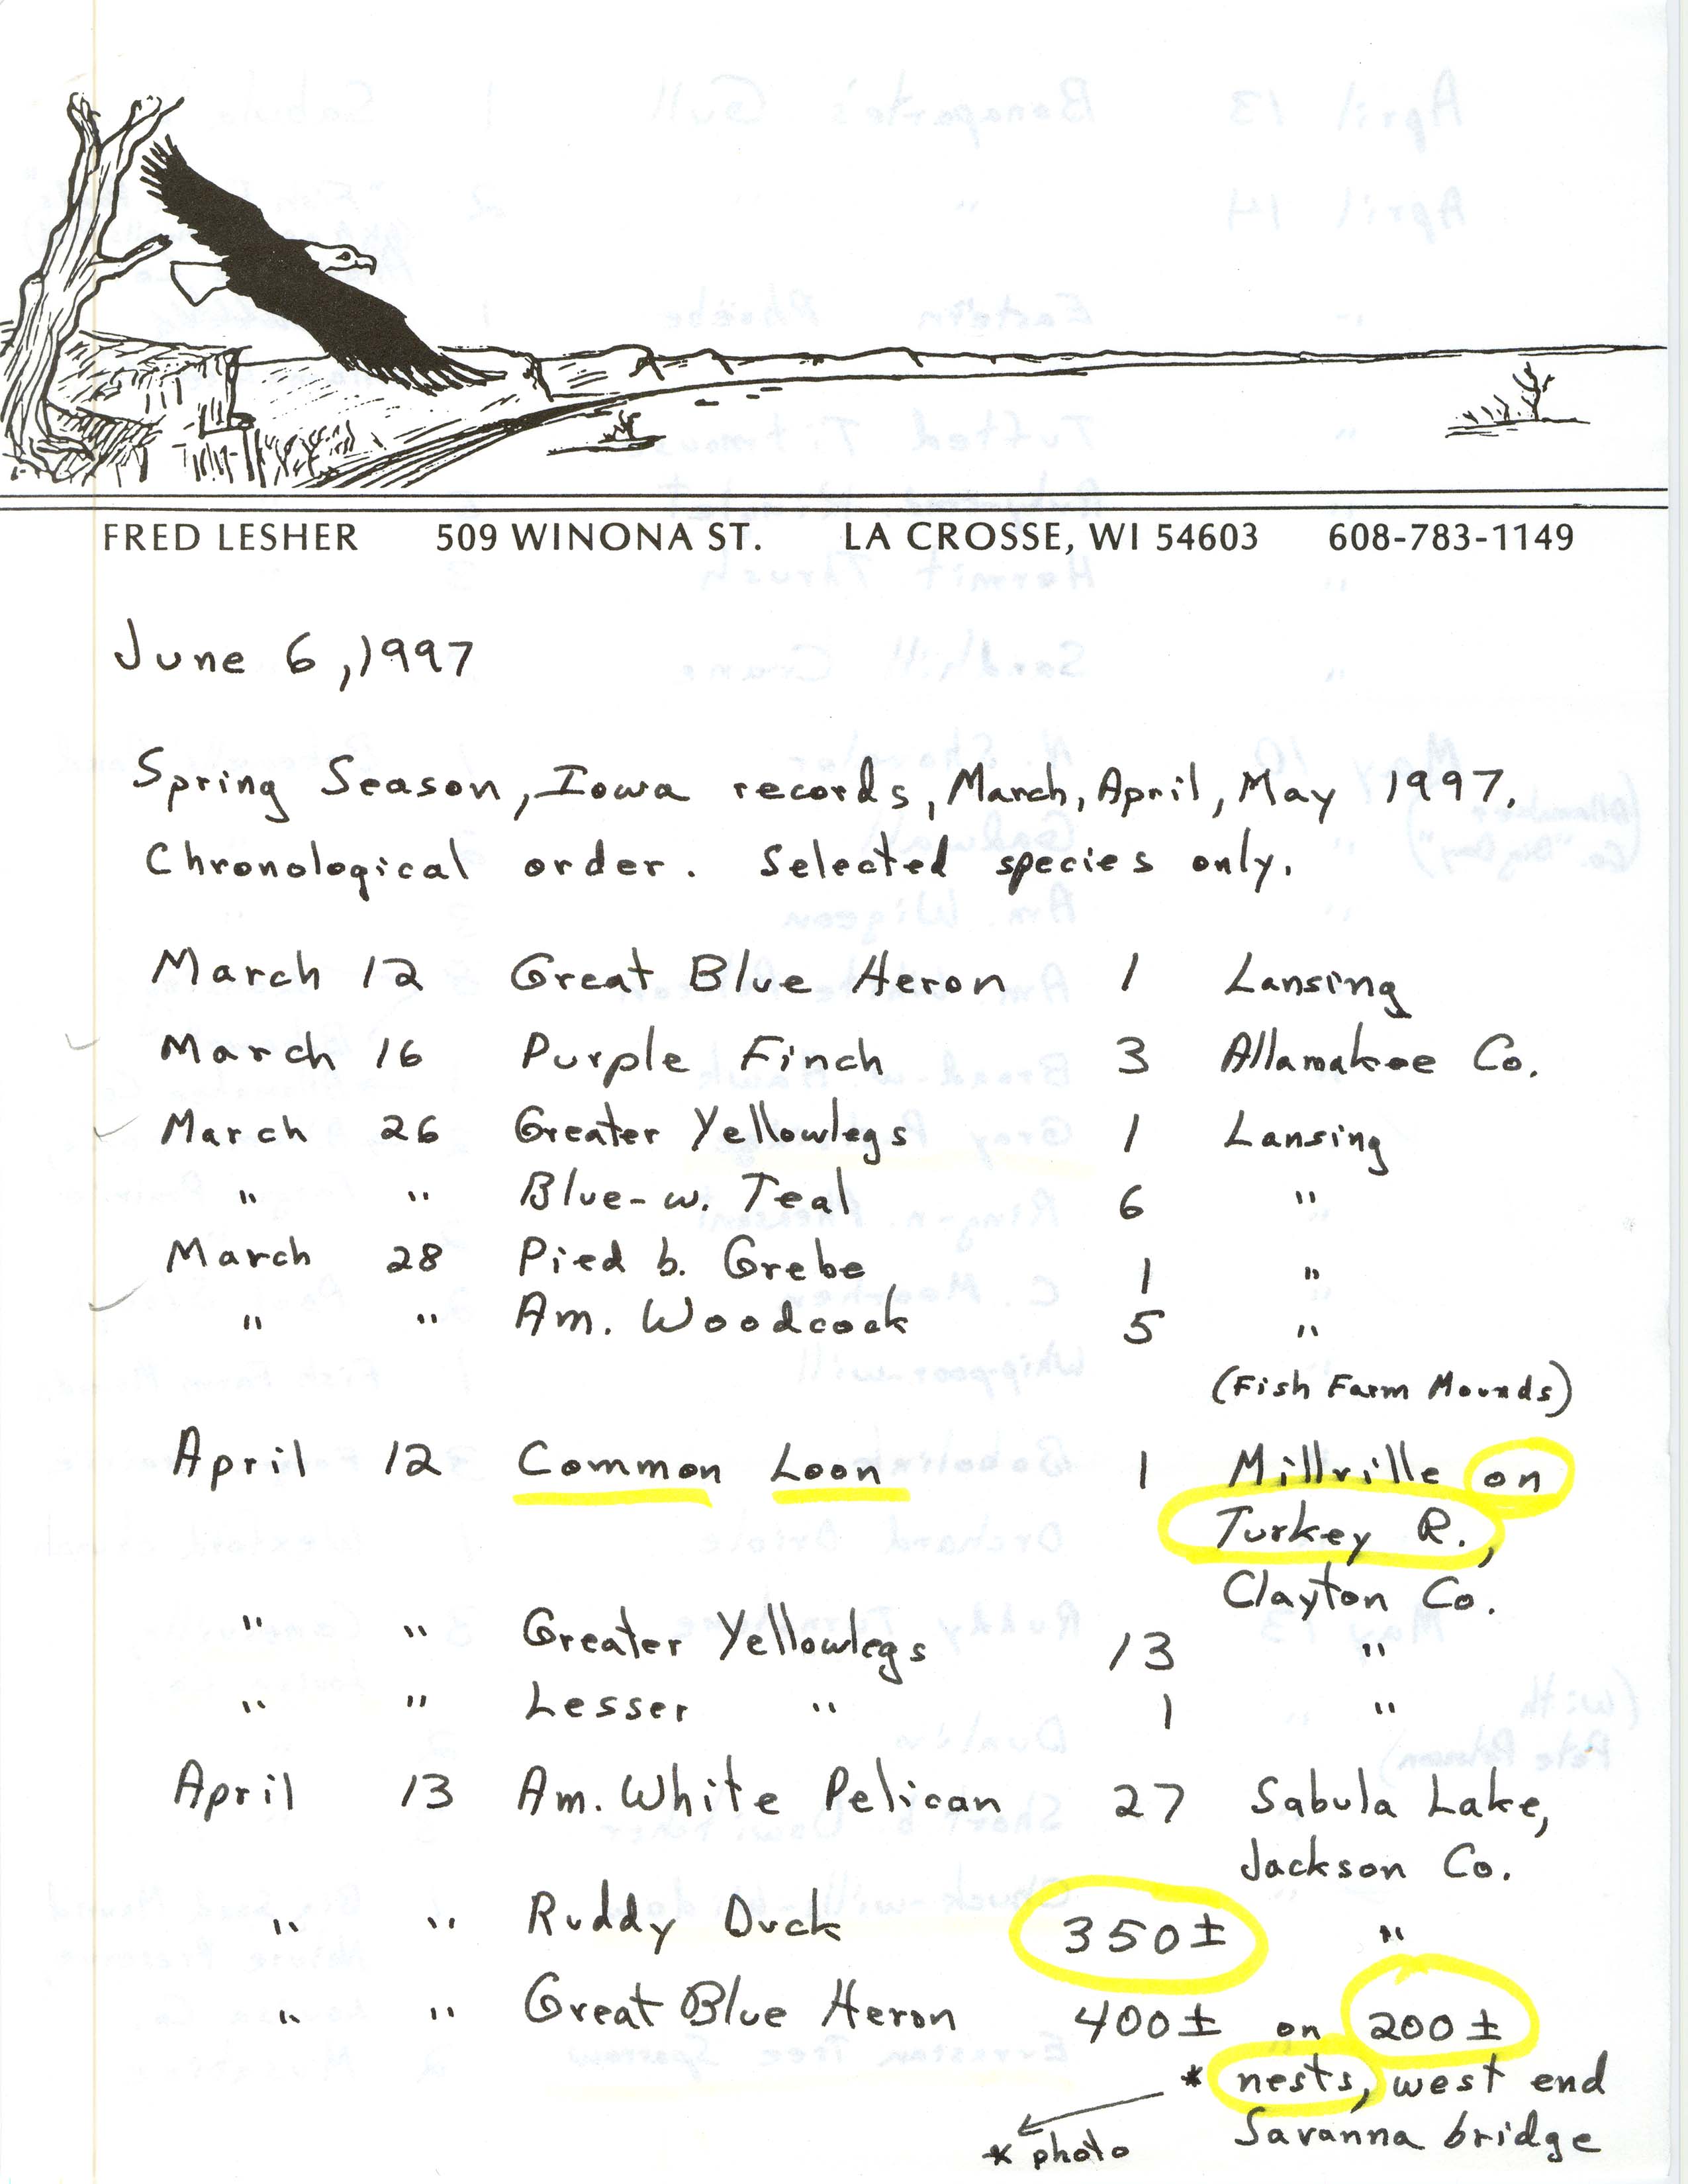 Field notes contributed by Fred Lesher, June 6, 1997